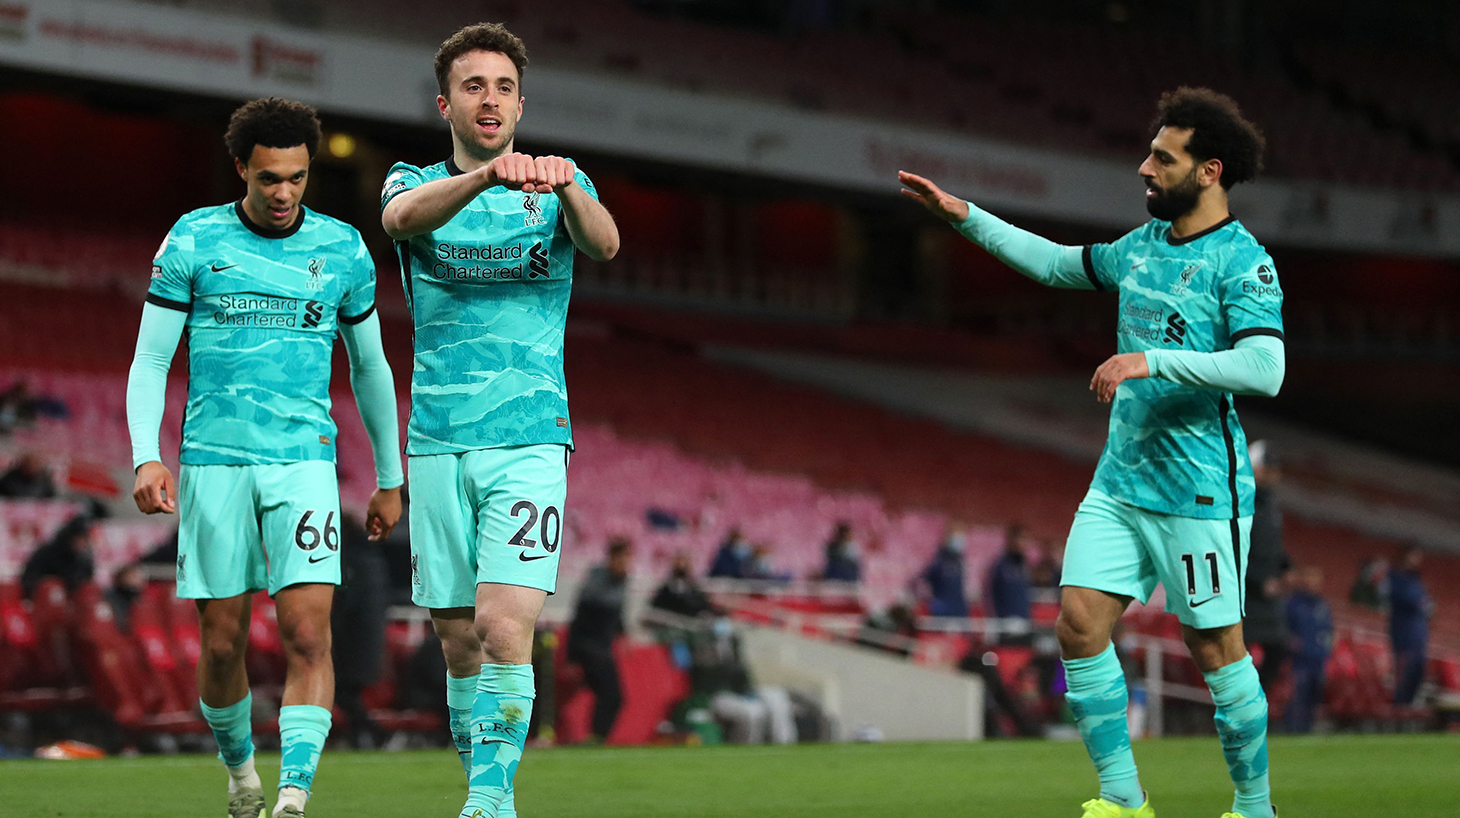 Liverpool's Portuguese striker Diogo Jota (2nd L) celebrates scoring his team's second goal during the English Premier League football match between Arsenal and Liverpool at the Emirates Stadium in London on April 3, 2021.